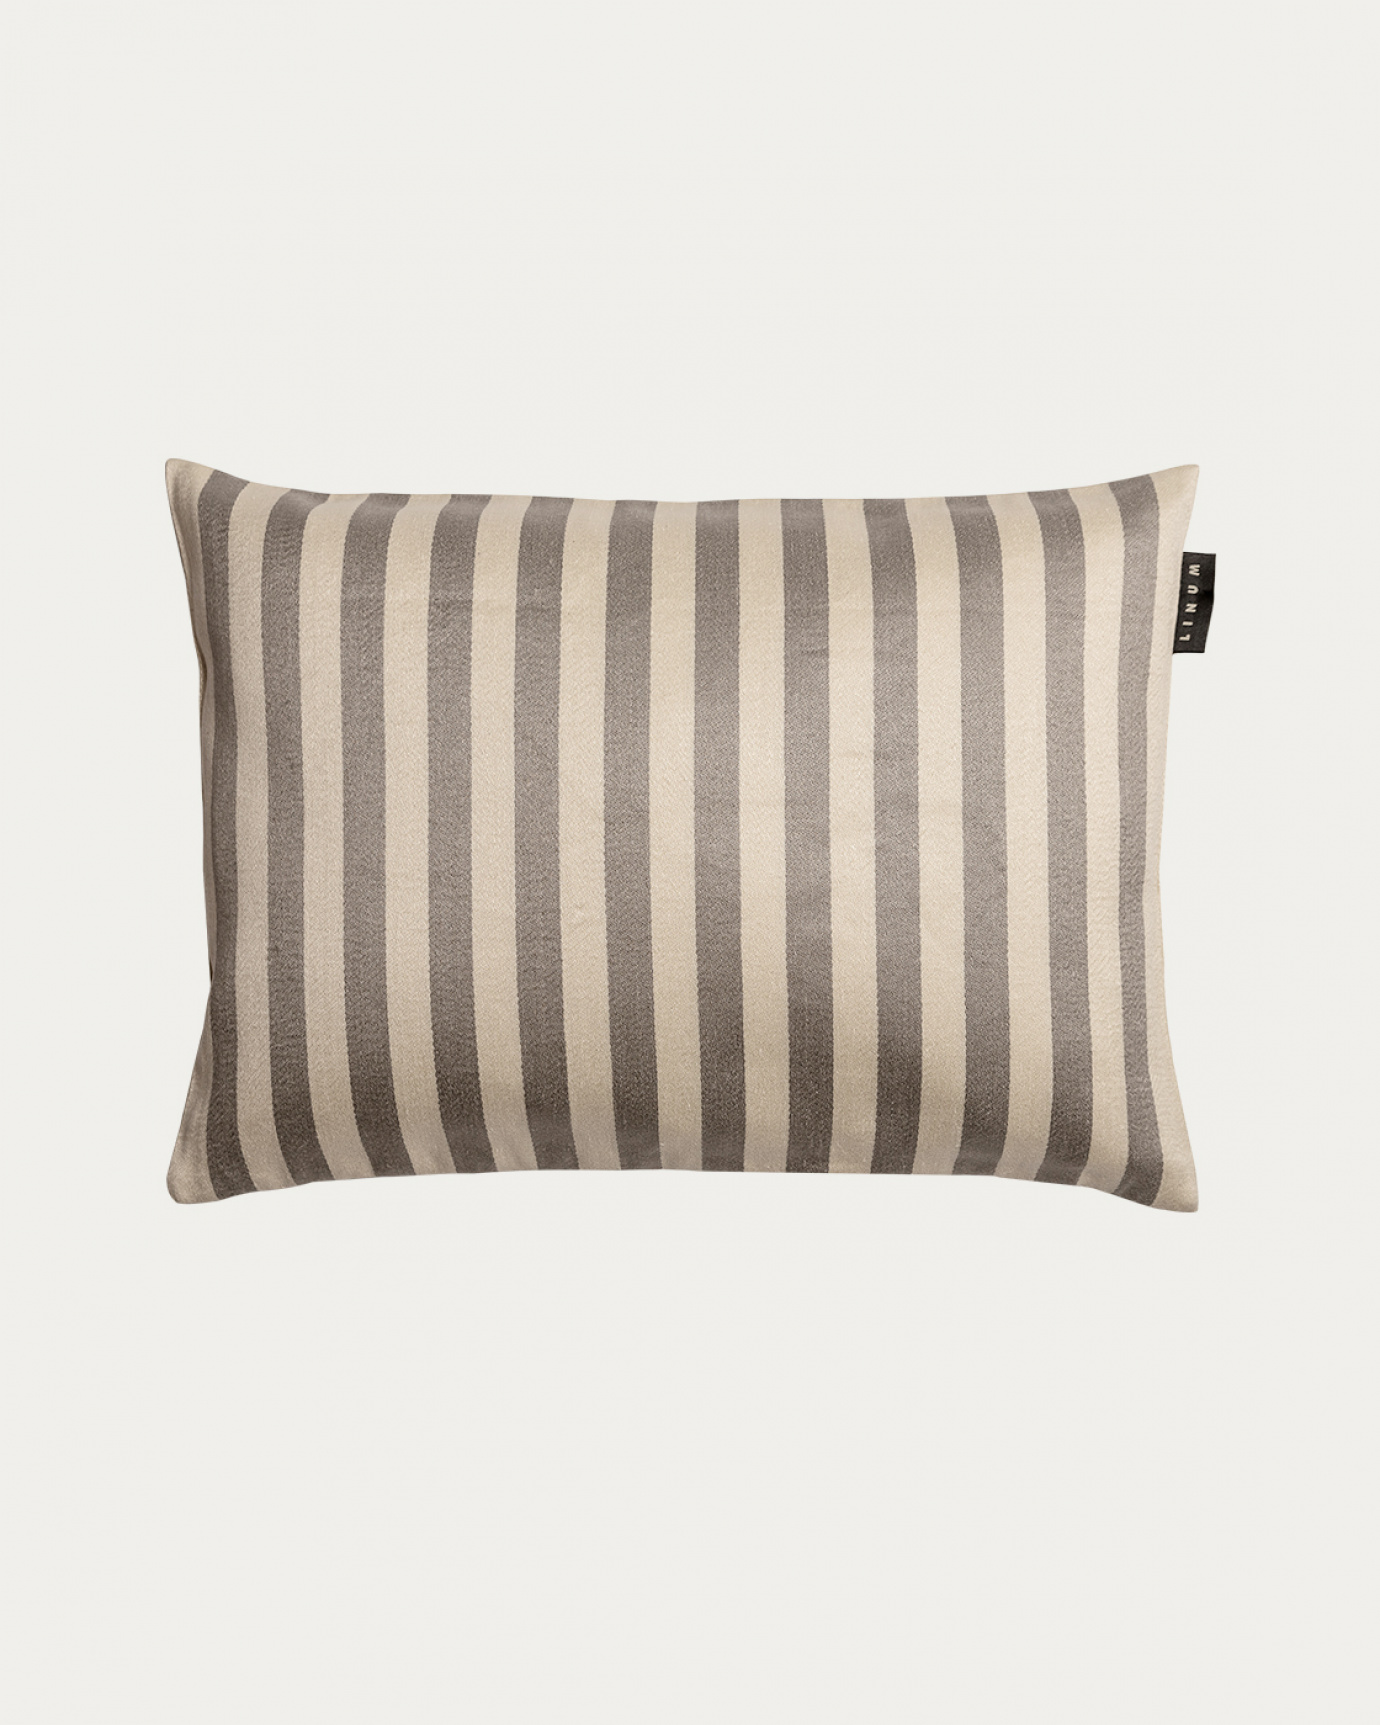 Product image mole brown AMALFI cushion cover with wide stripes made of 77% linen and 23% cotton from LINUM DESIGN. Size 35x50 cm.